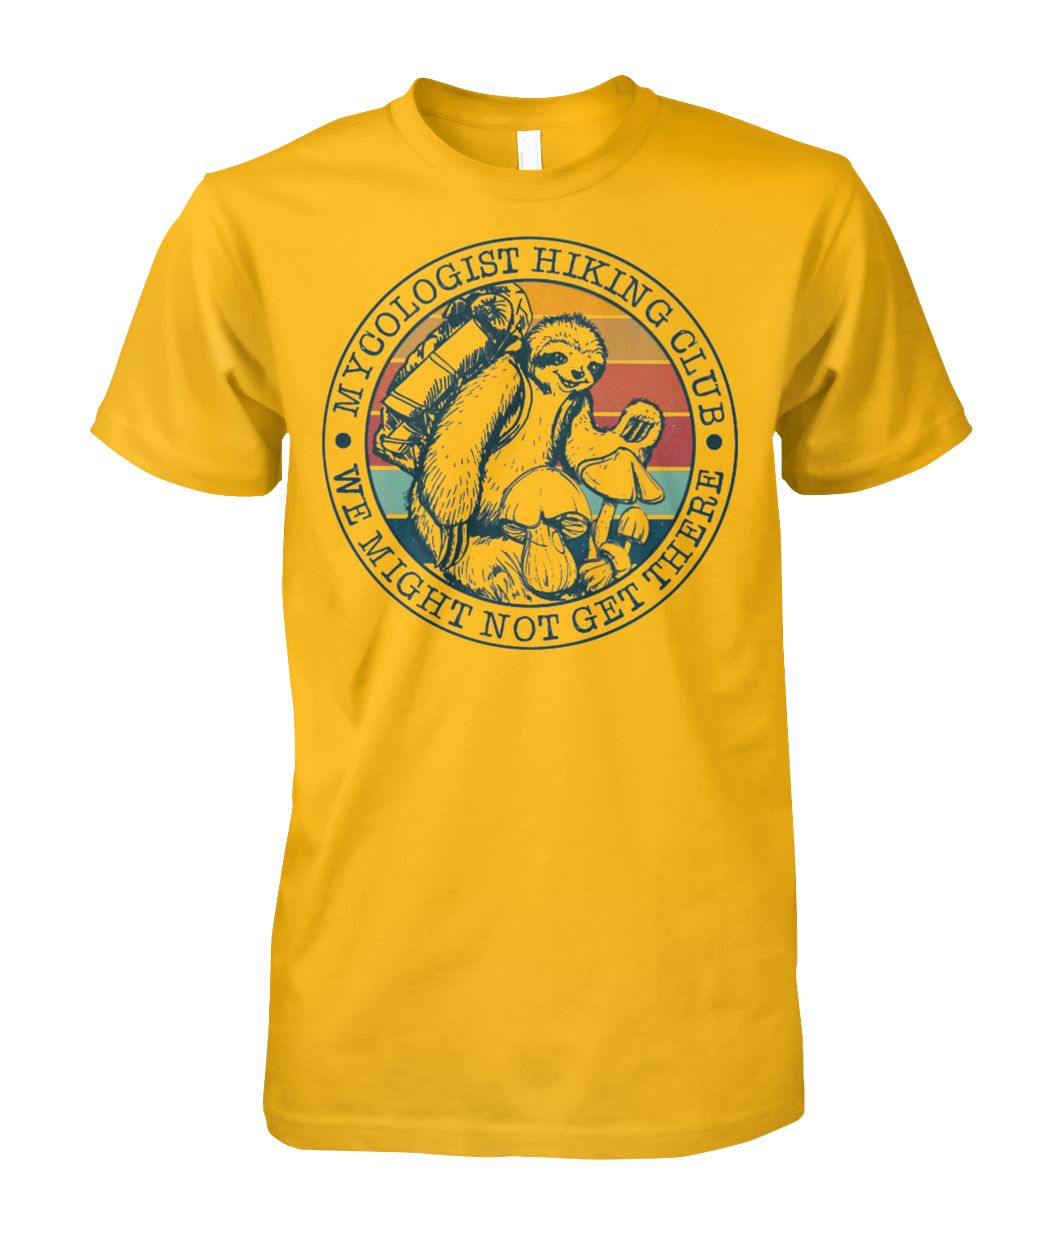 Mycologist hiking club we might not get there sloth shirt